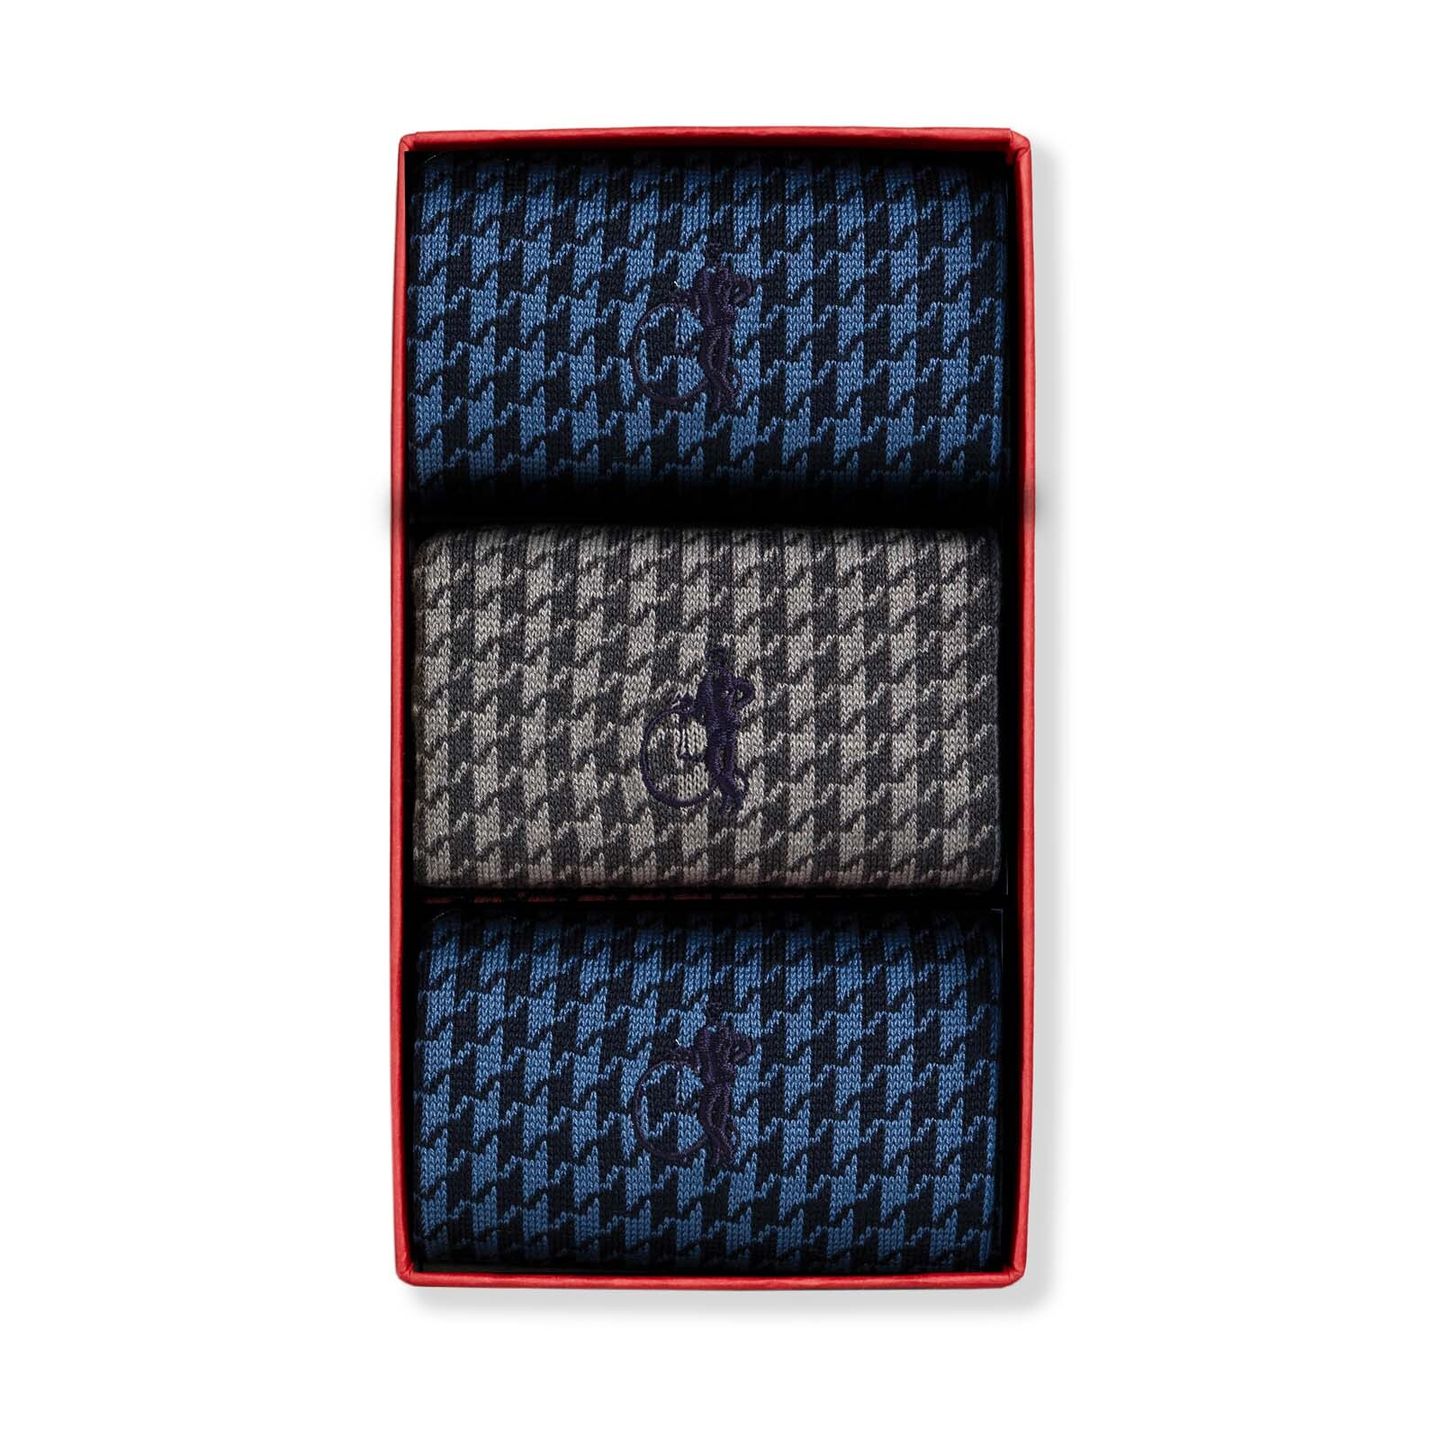 3 pairs of Houndstooth patterned socks in blue and grey